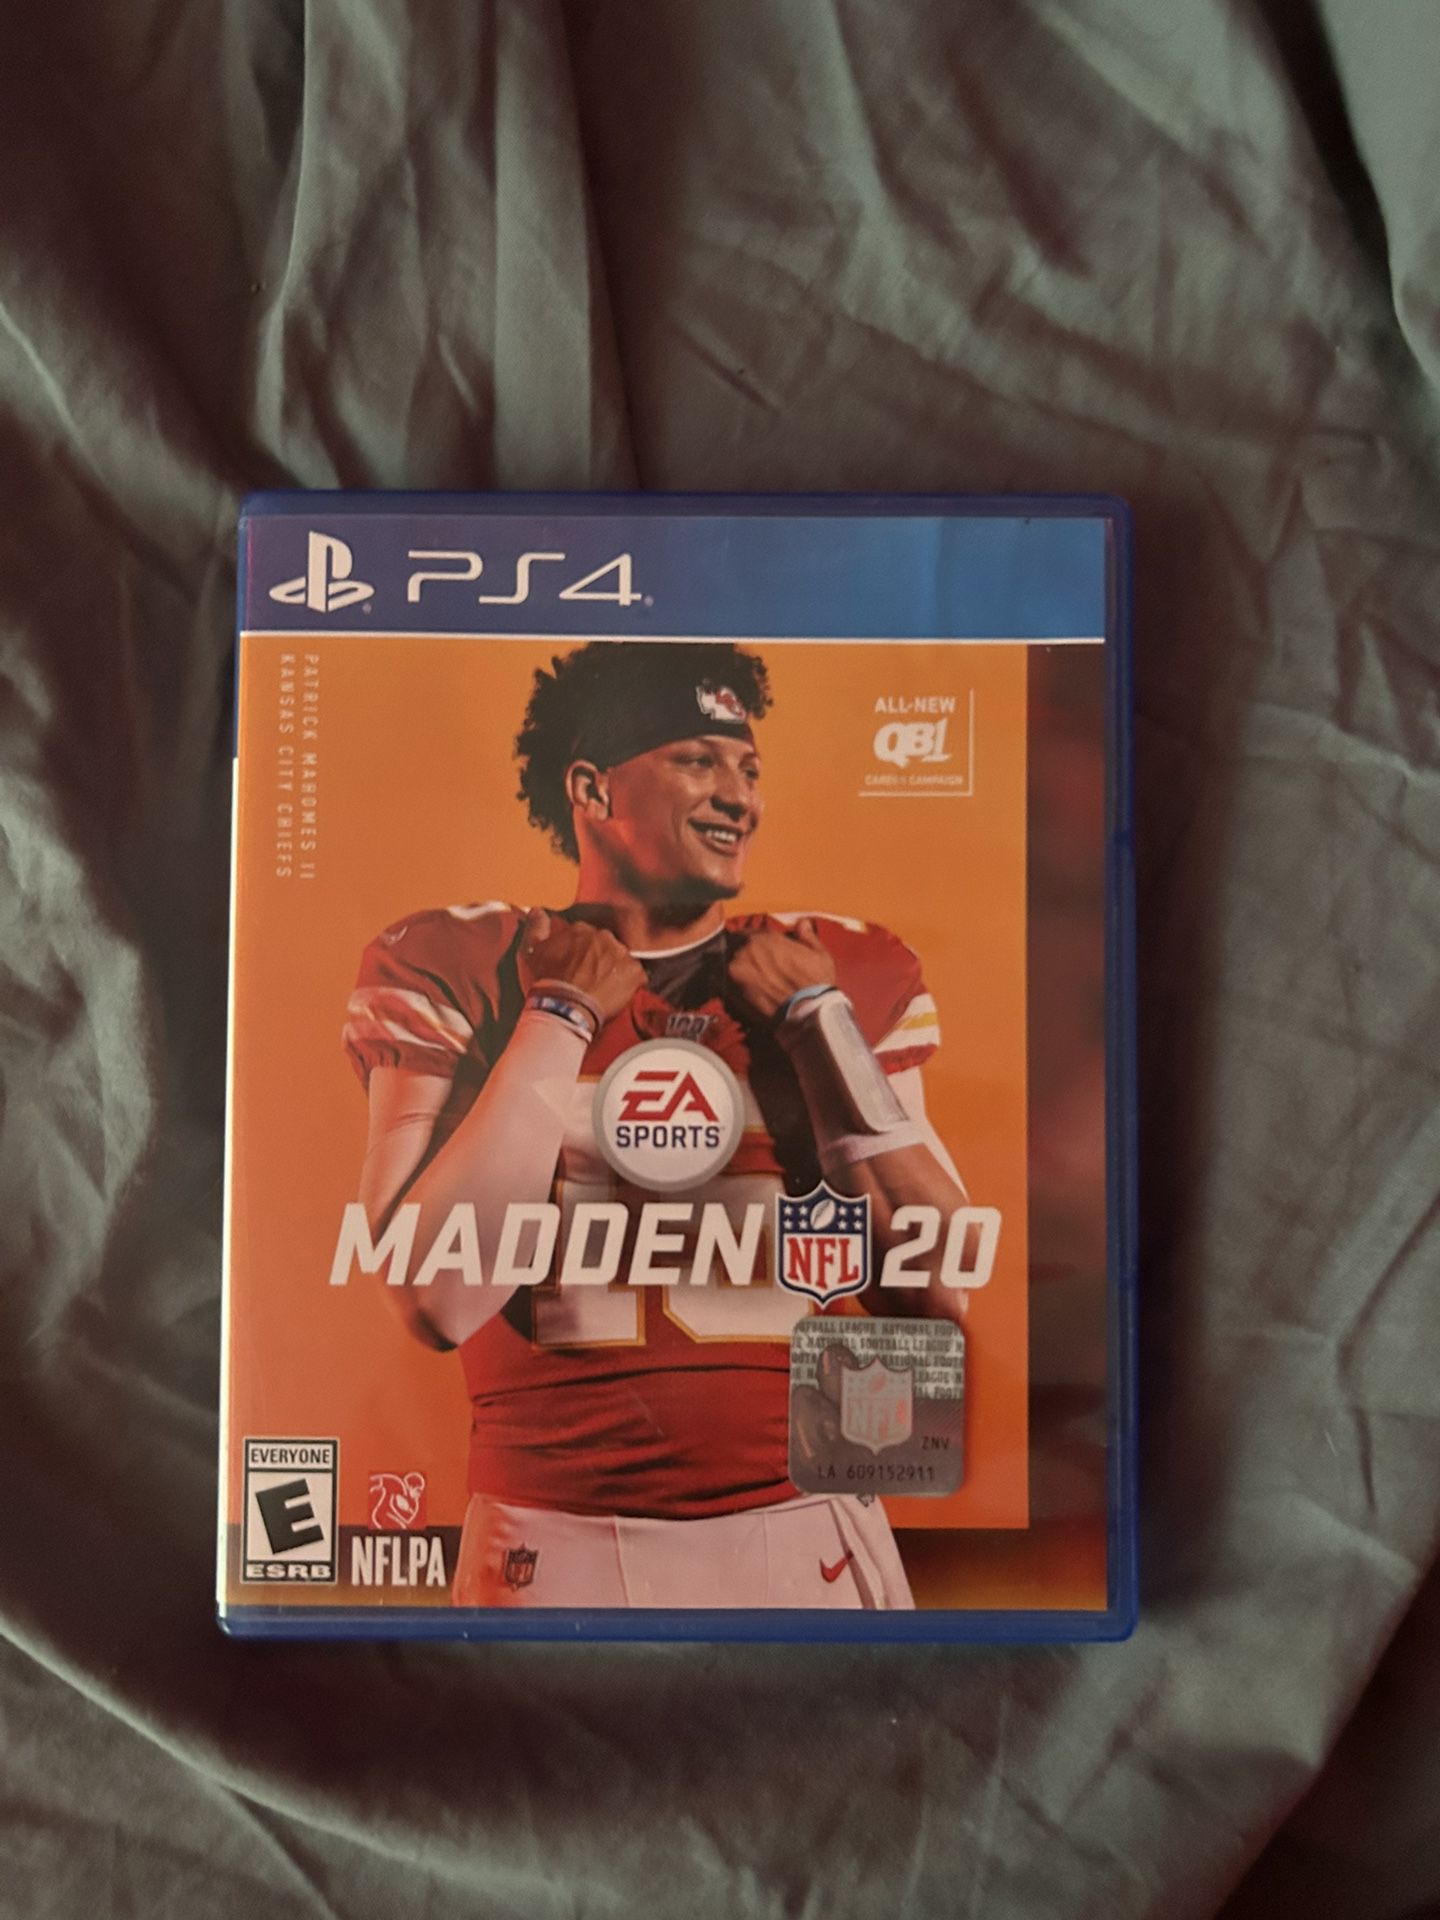 Madden 20 for the PS4